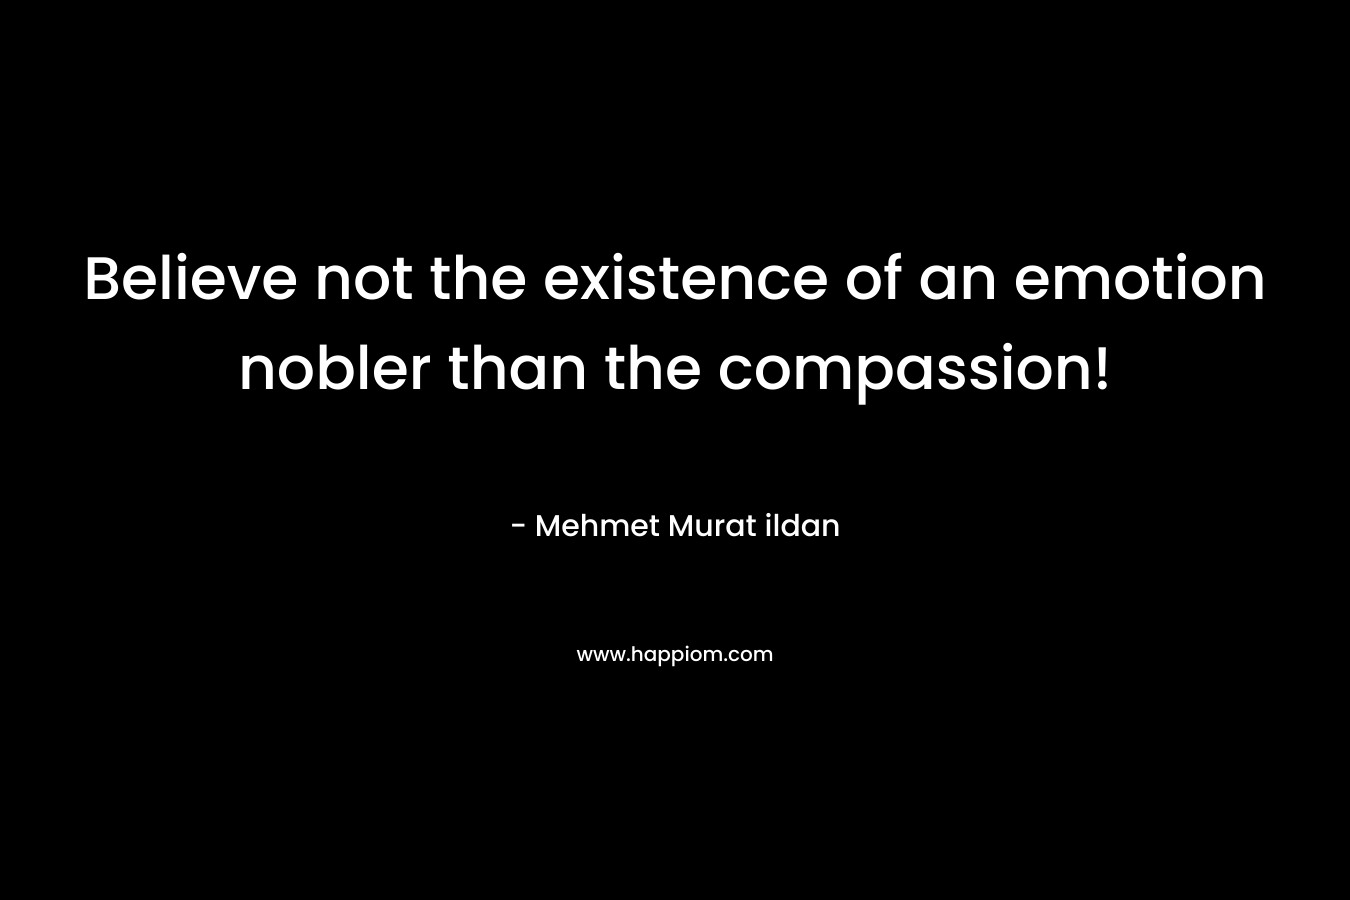 Believe not the existence of an emotion nobler than the compassion!